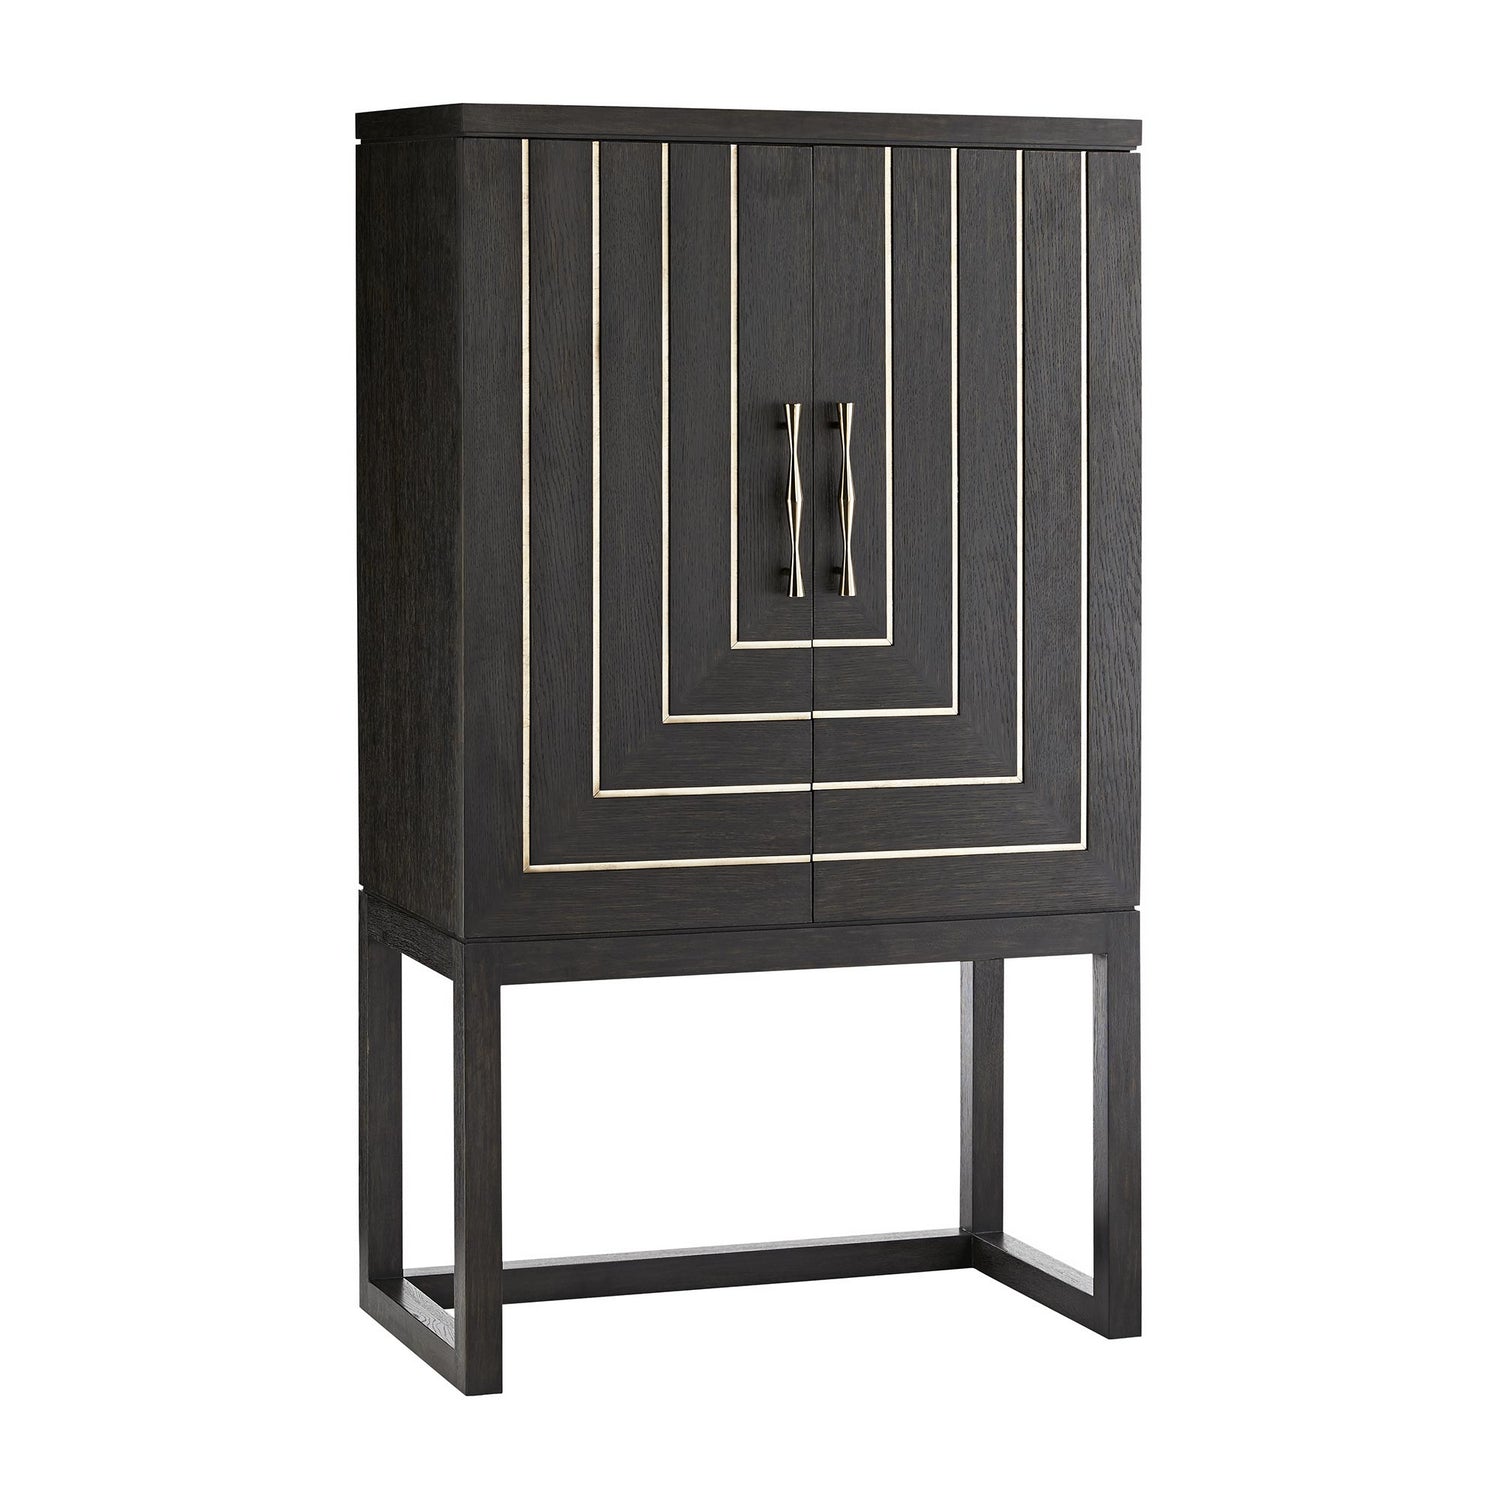 Cabinet from the McMahen collection in Sable finish